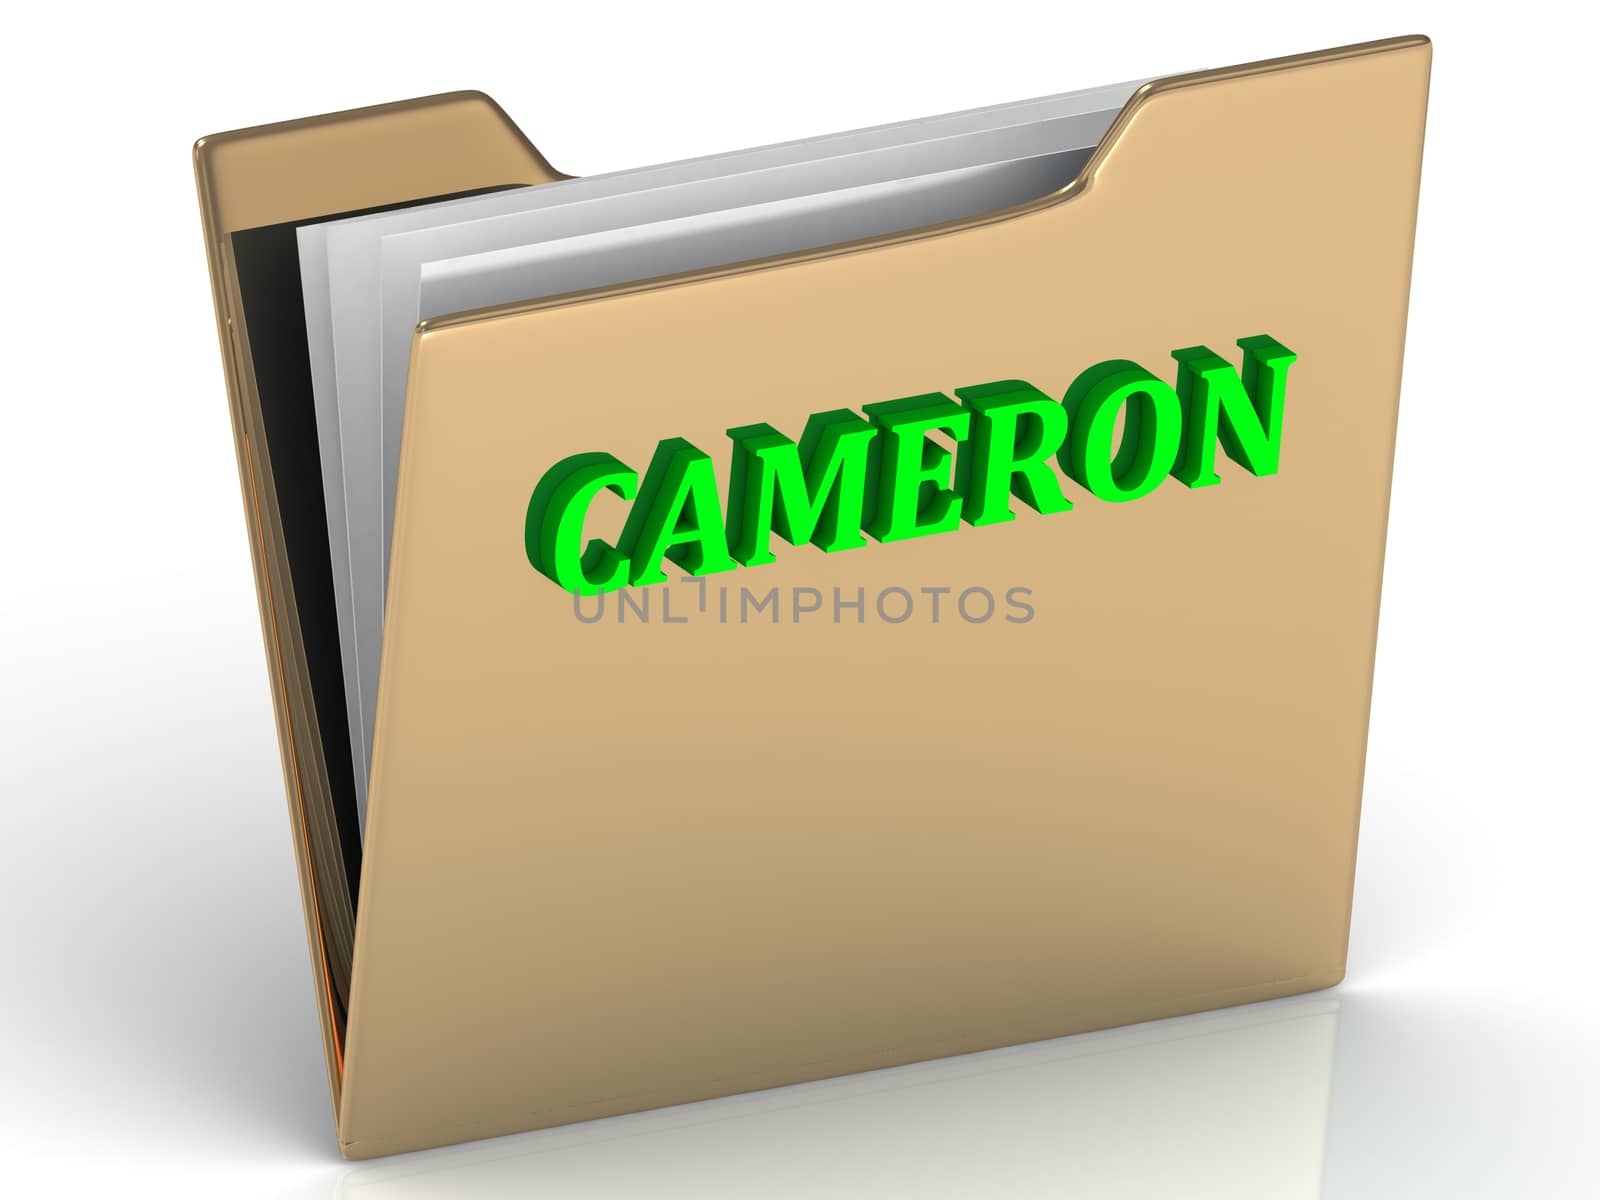 CAMERON- bright green letters on gold paperwork folder by GreenMost